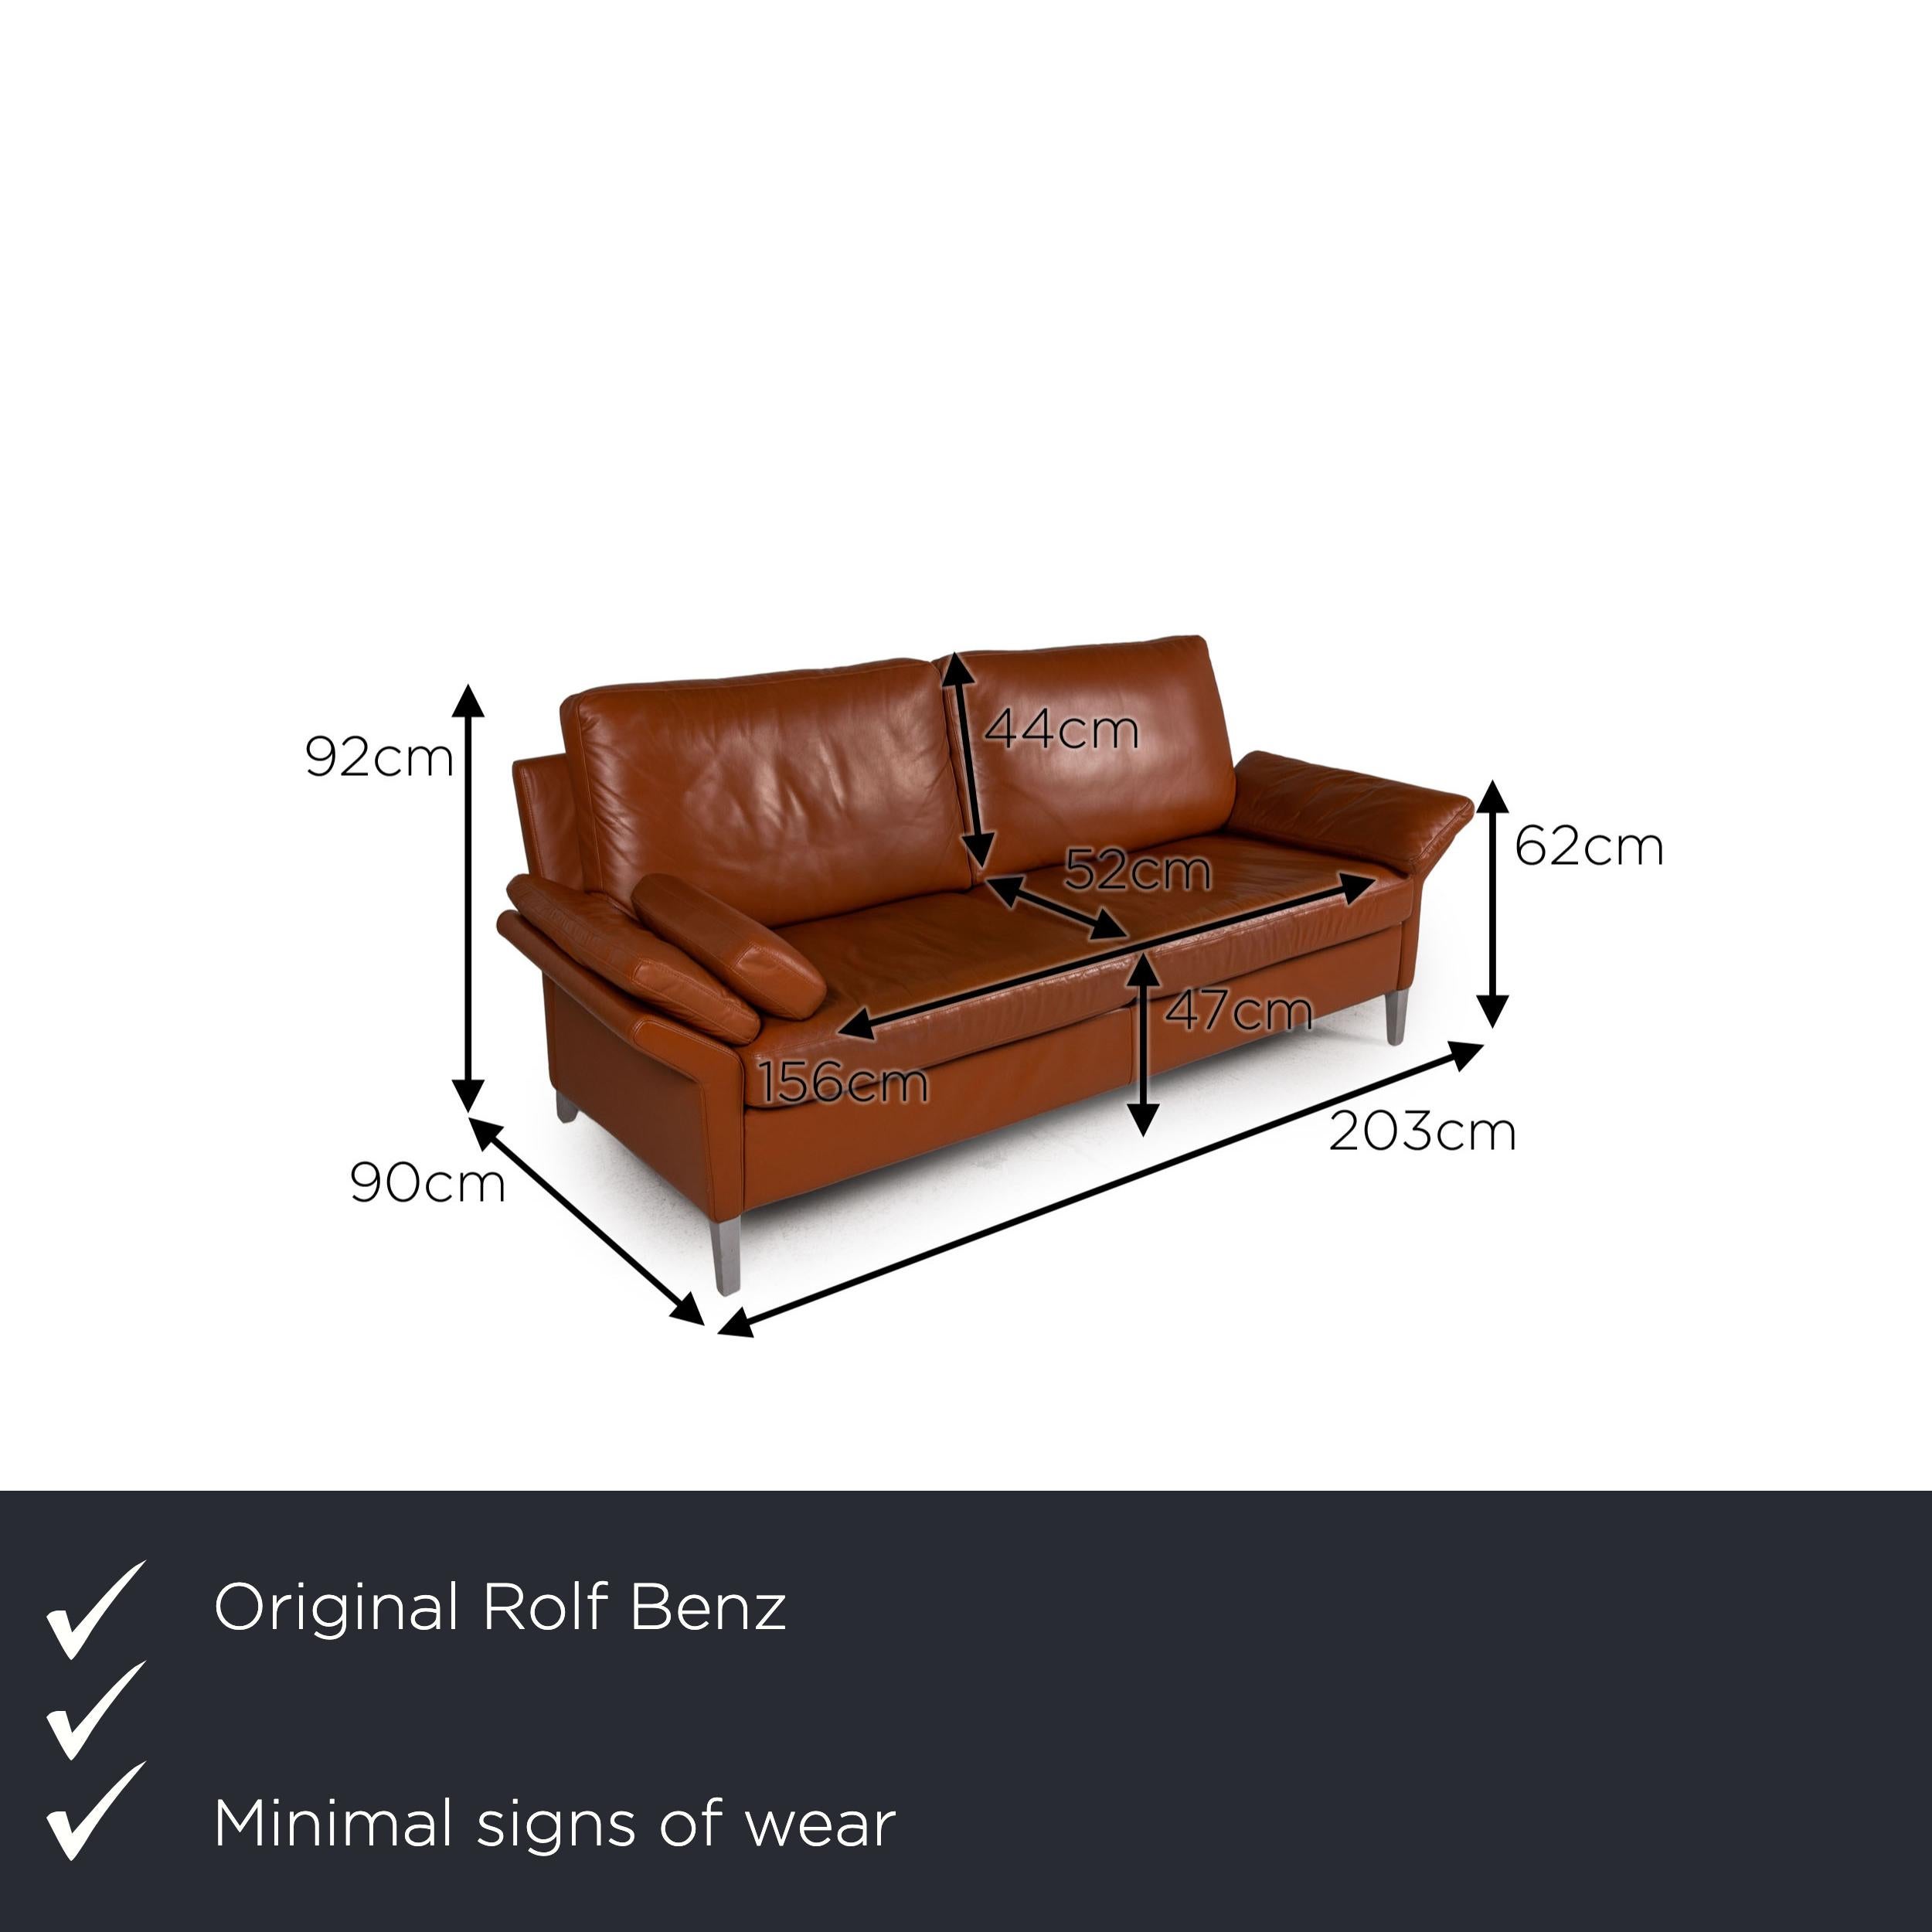 We present to you a Rolf Benz 3300 leather sofa brown three-seater couch.

Product measurements in centimeters:

Depth: 90
Width: 203
Height: 92
Seat height: 47
Rest height: 62
Seat depth: 52
Seat width: 156
Back height: 44.

   